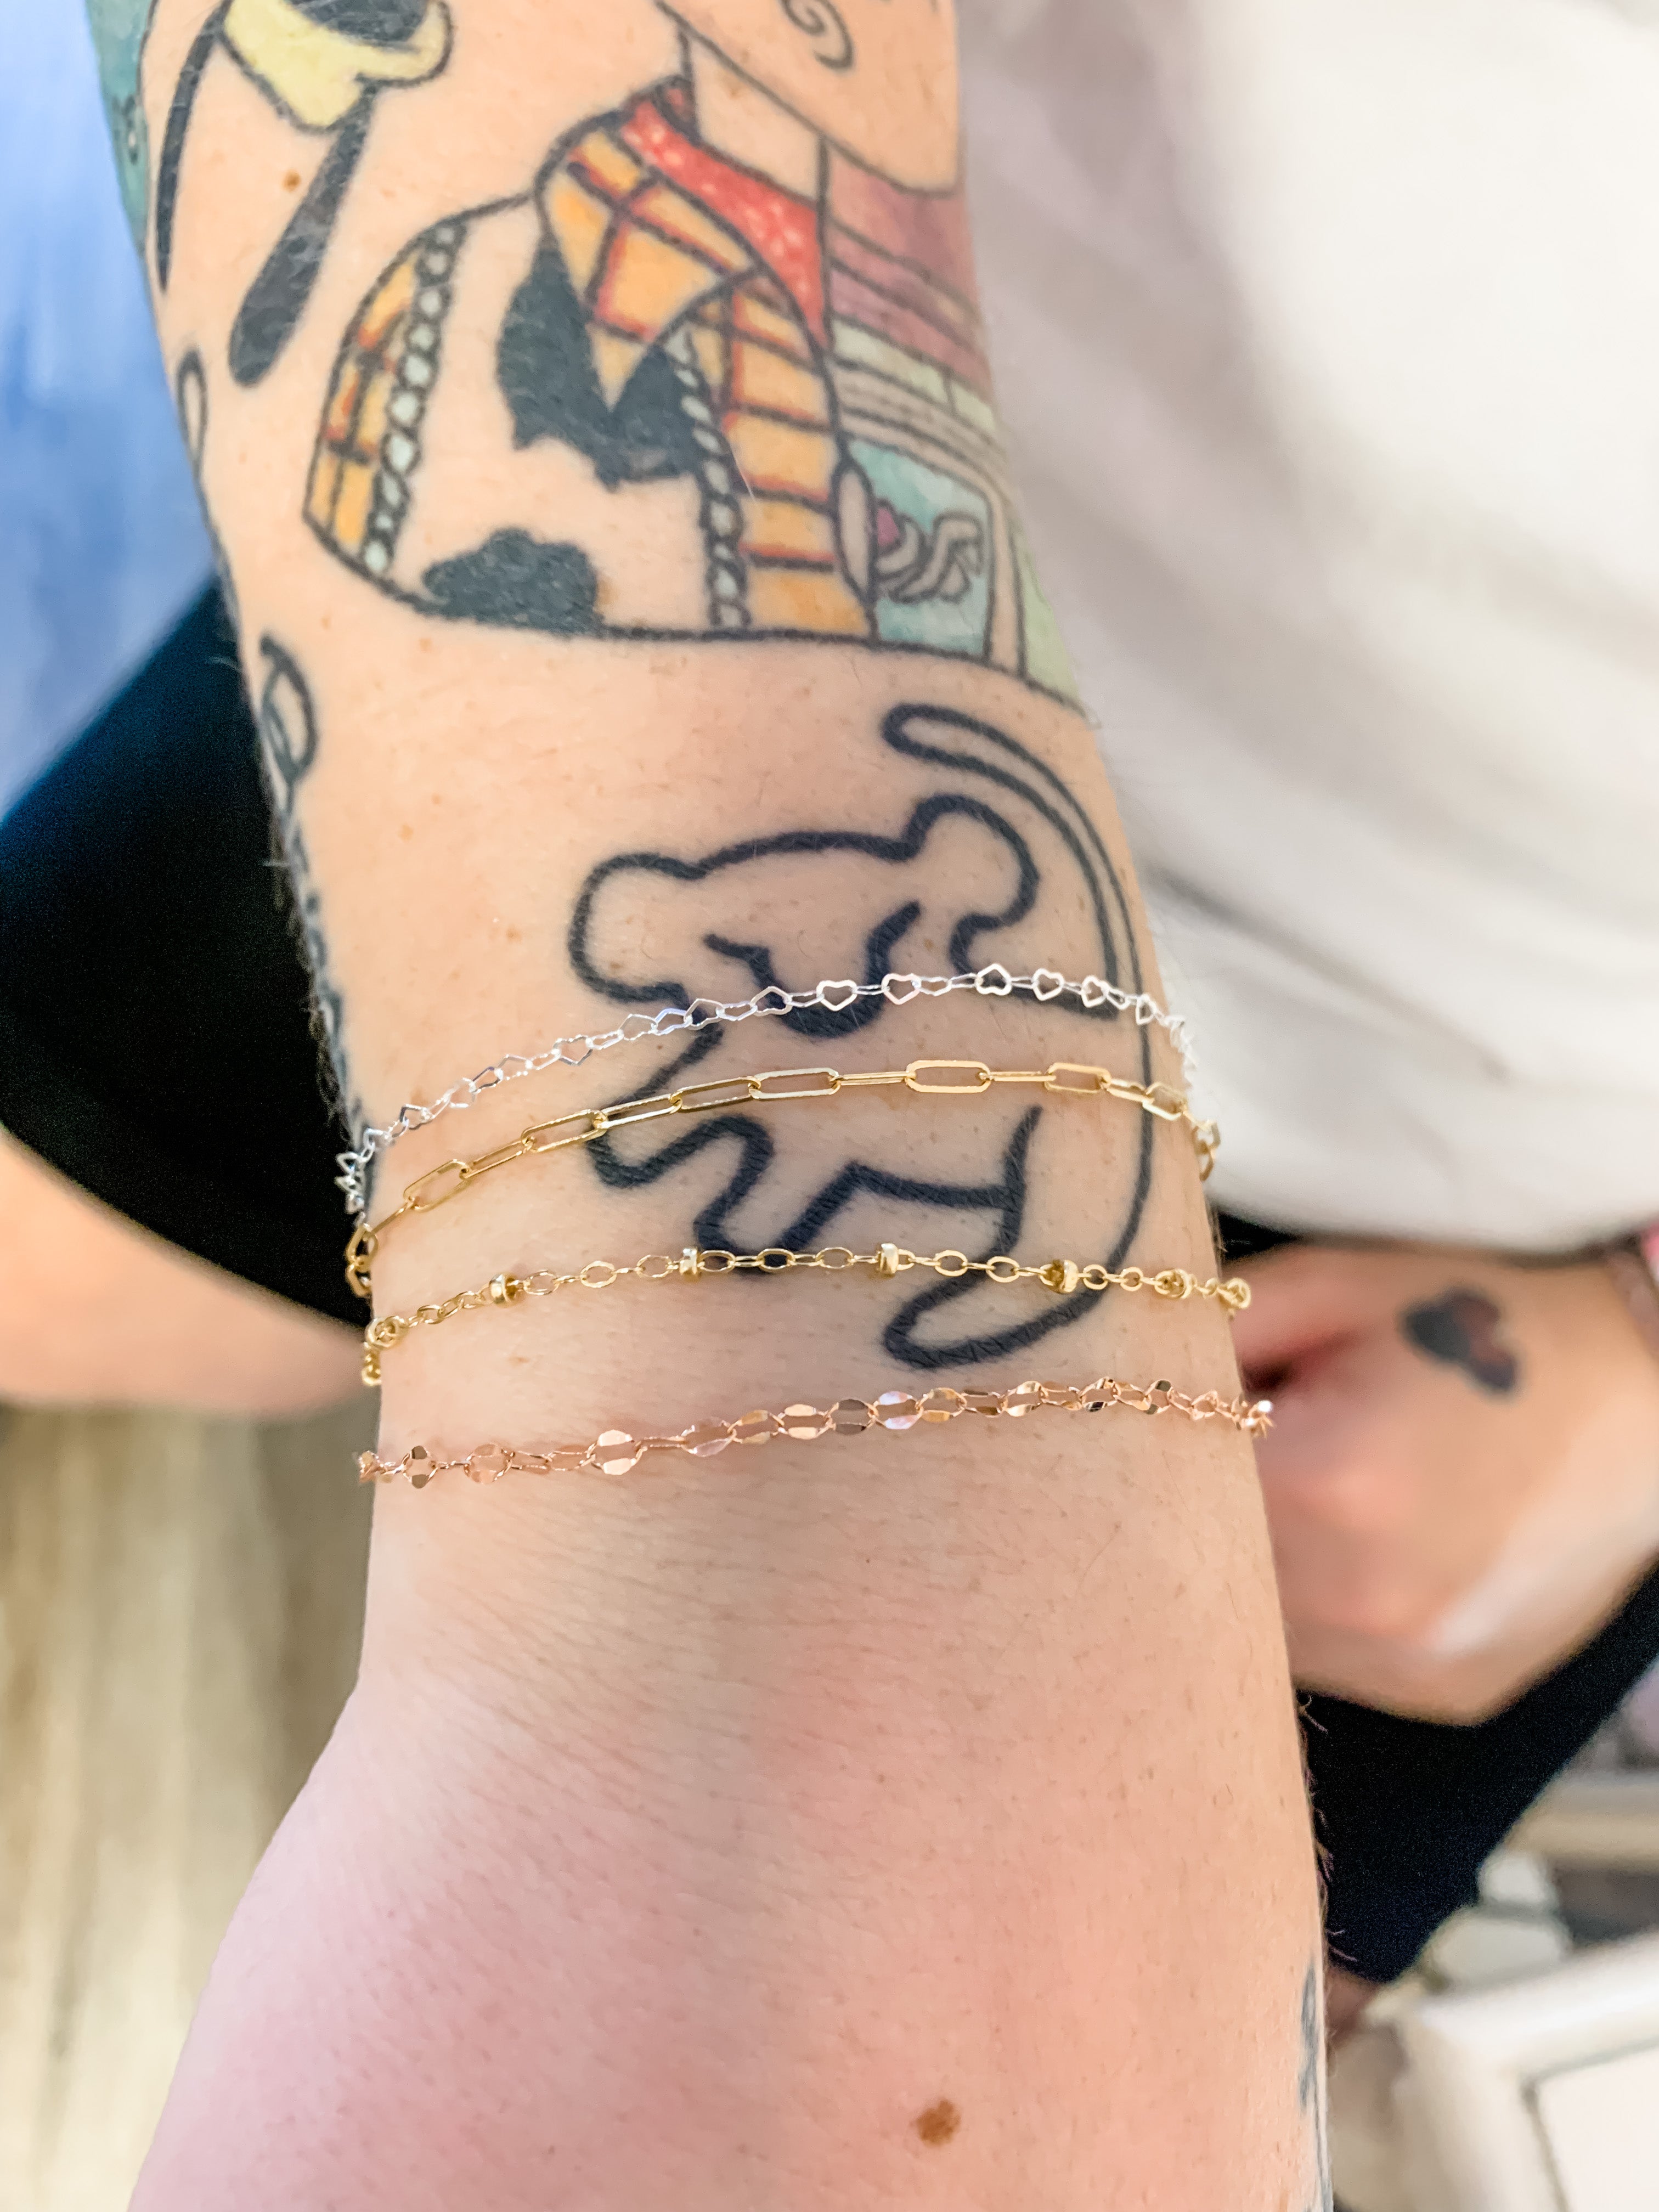 Buy Arm Candy Temporary Tattoo Transfers. Chain With Charms, Hippie  Friendship Bracelets Body Stickers. Kids Tattoos. Girls Party Favors,  Gifts. Online in India - Etsy